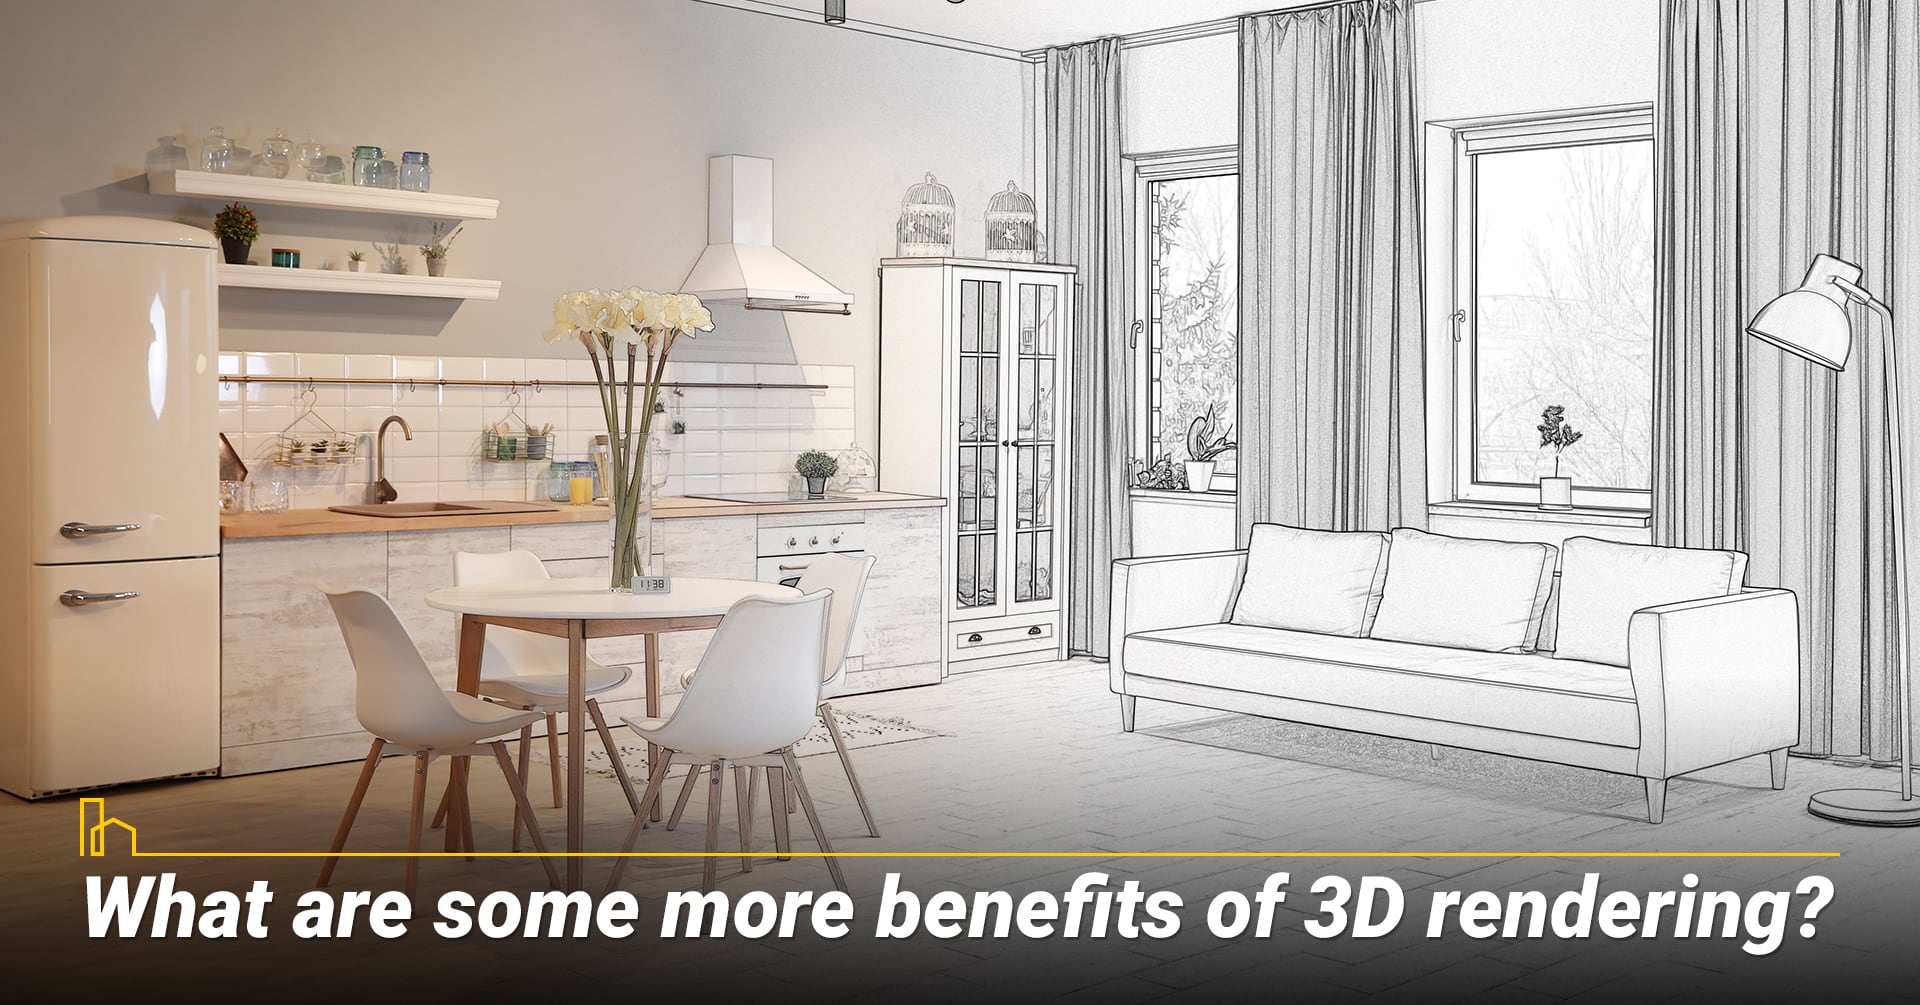 What are some more benefits of 3D rendering?